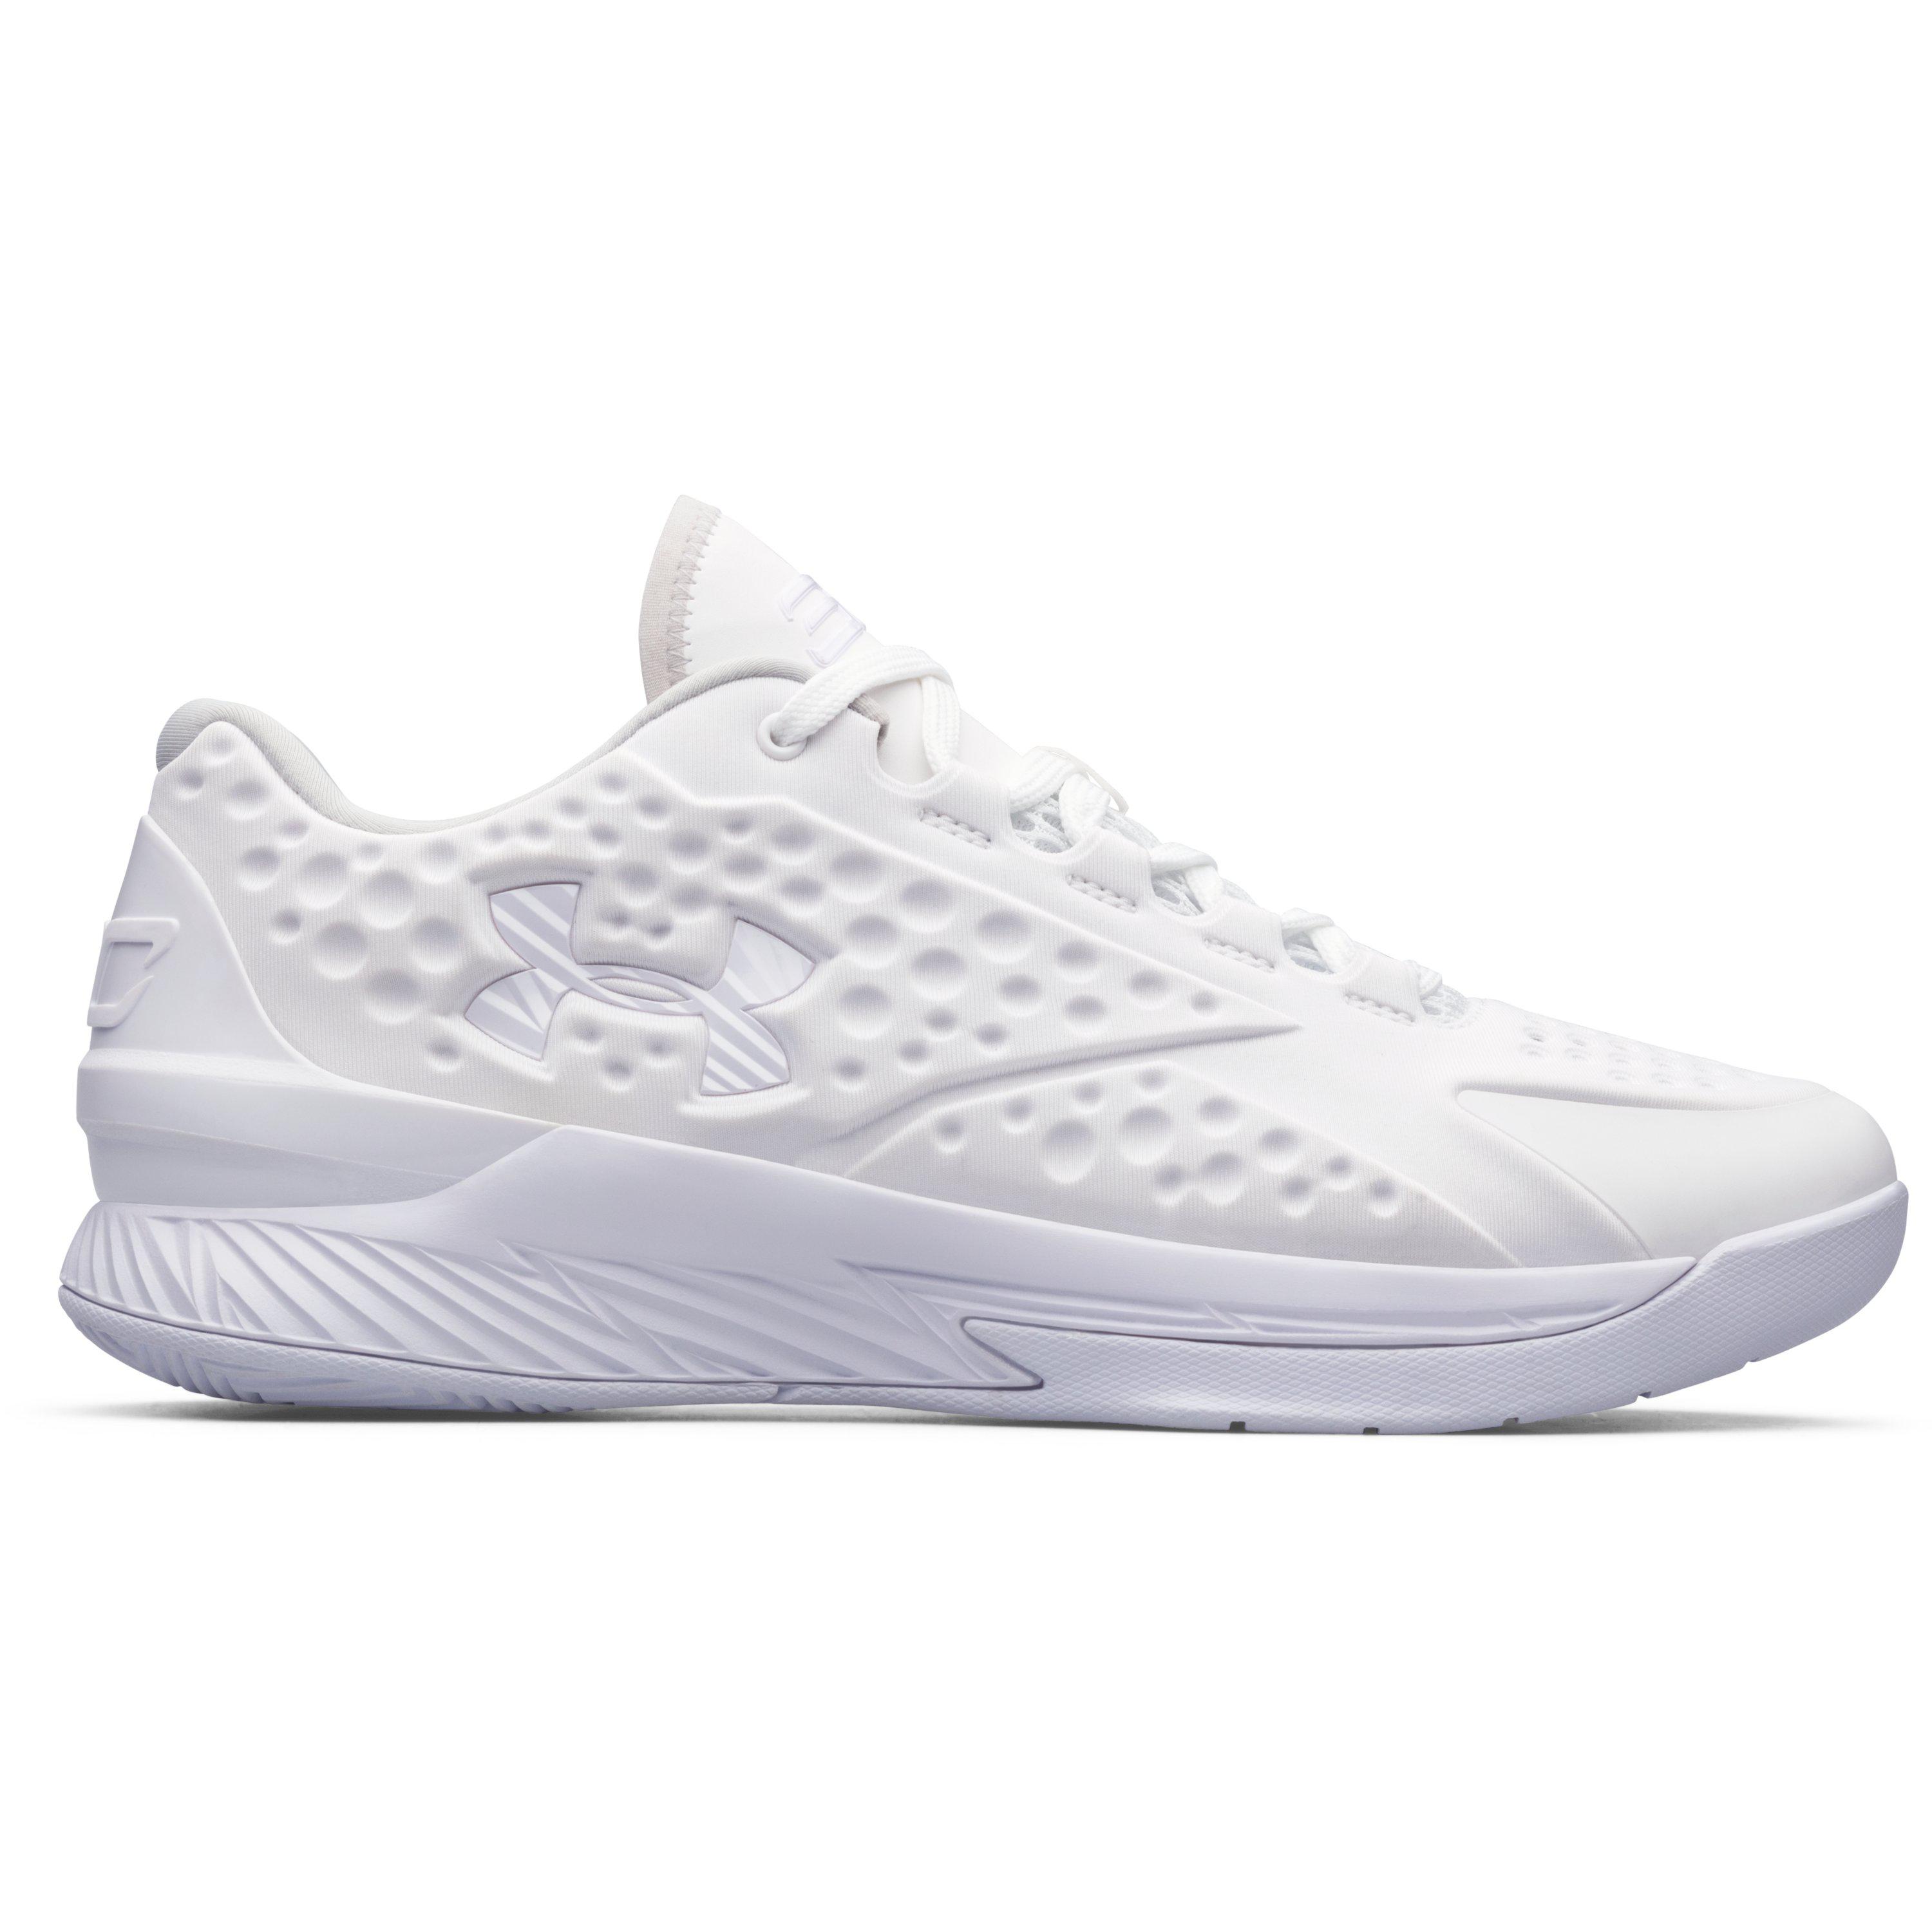 curry 1 low grey